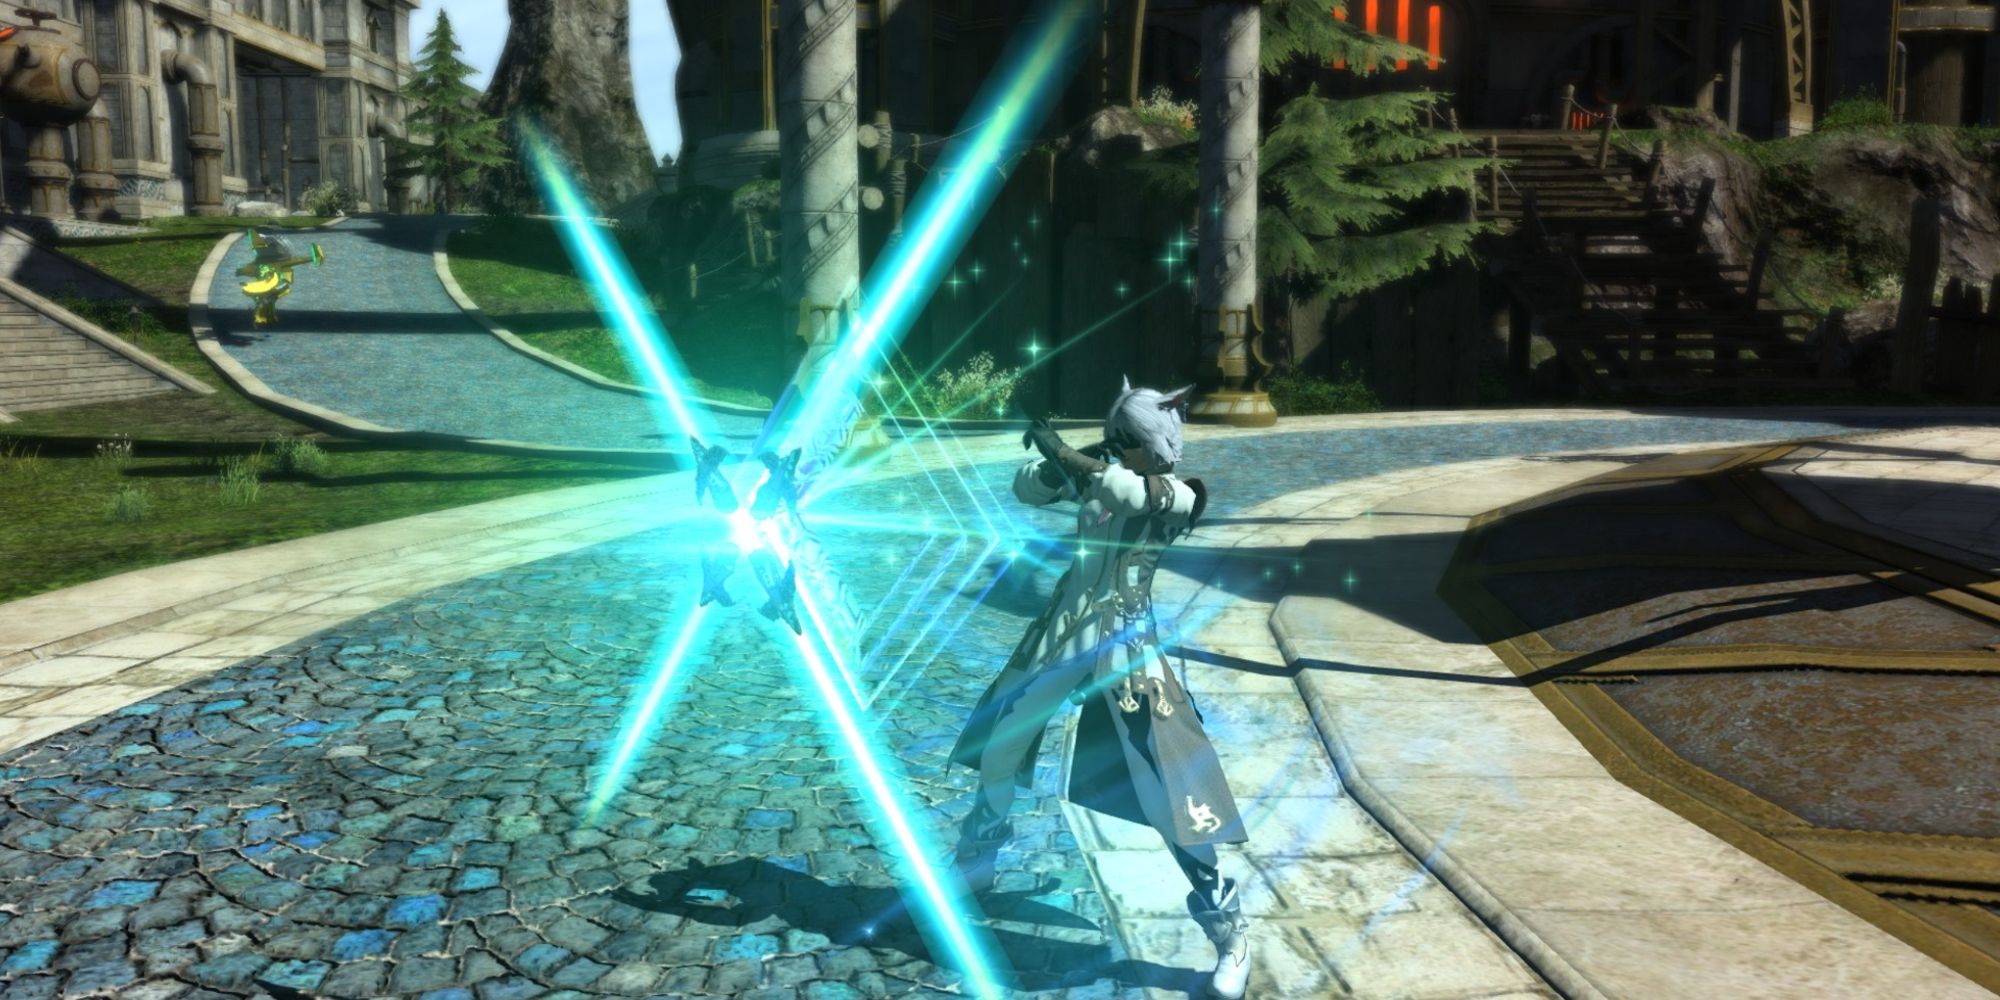 A Sage casting a Barrier with its Nouliths, creating an "X" pattern in front of a diamond shield in Final Fantasy 14